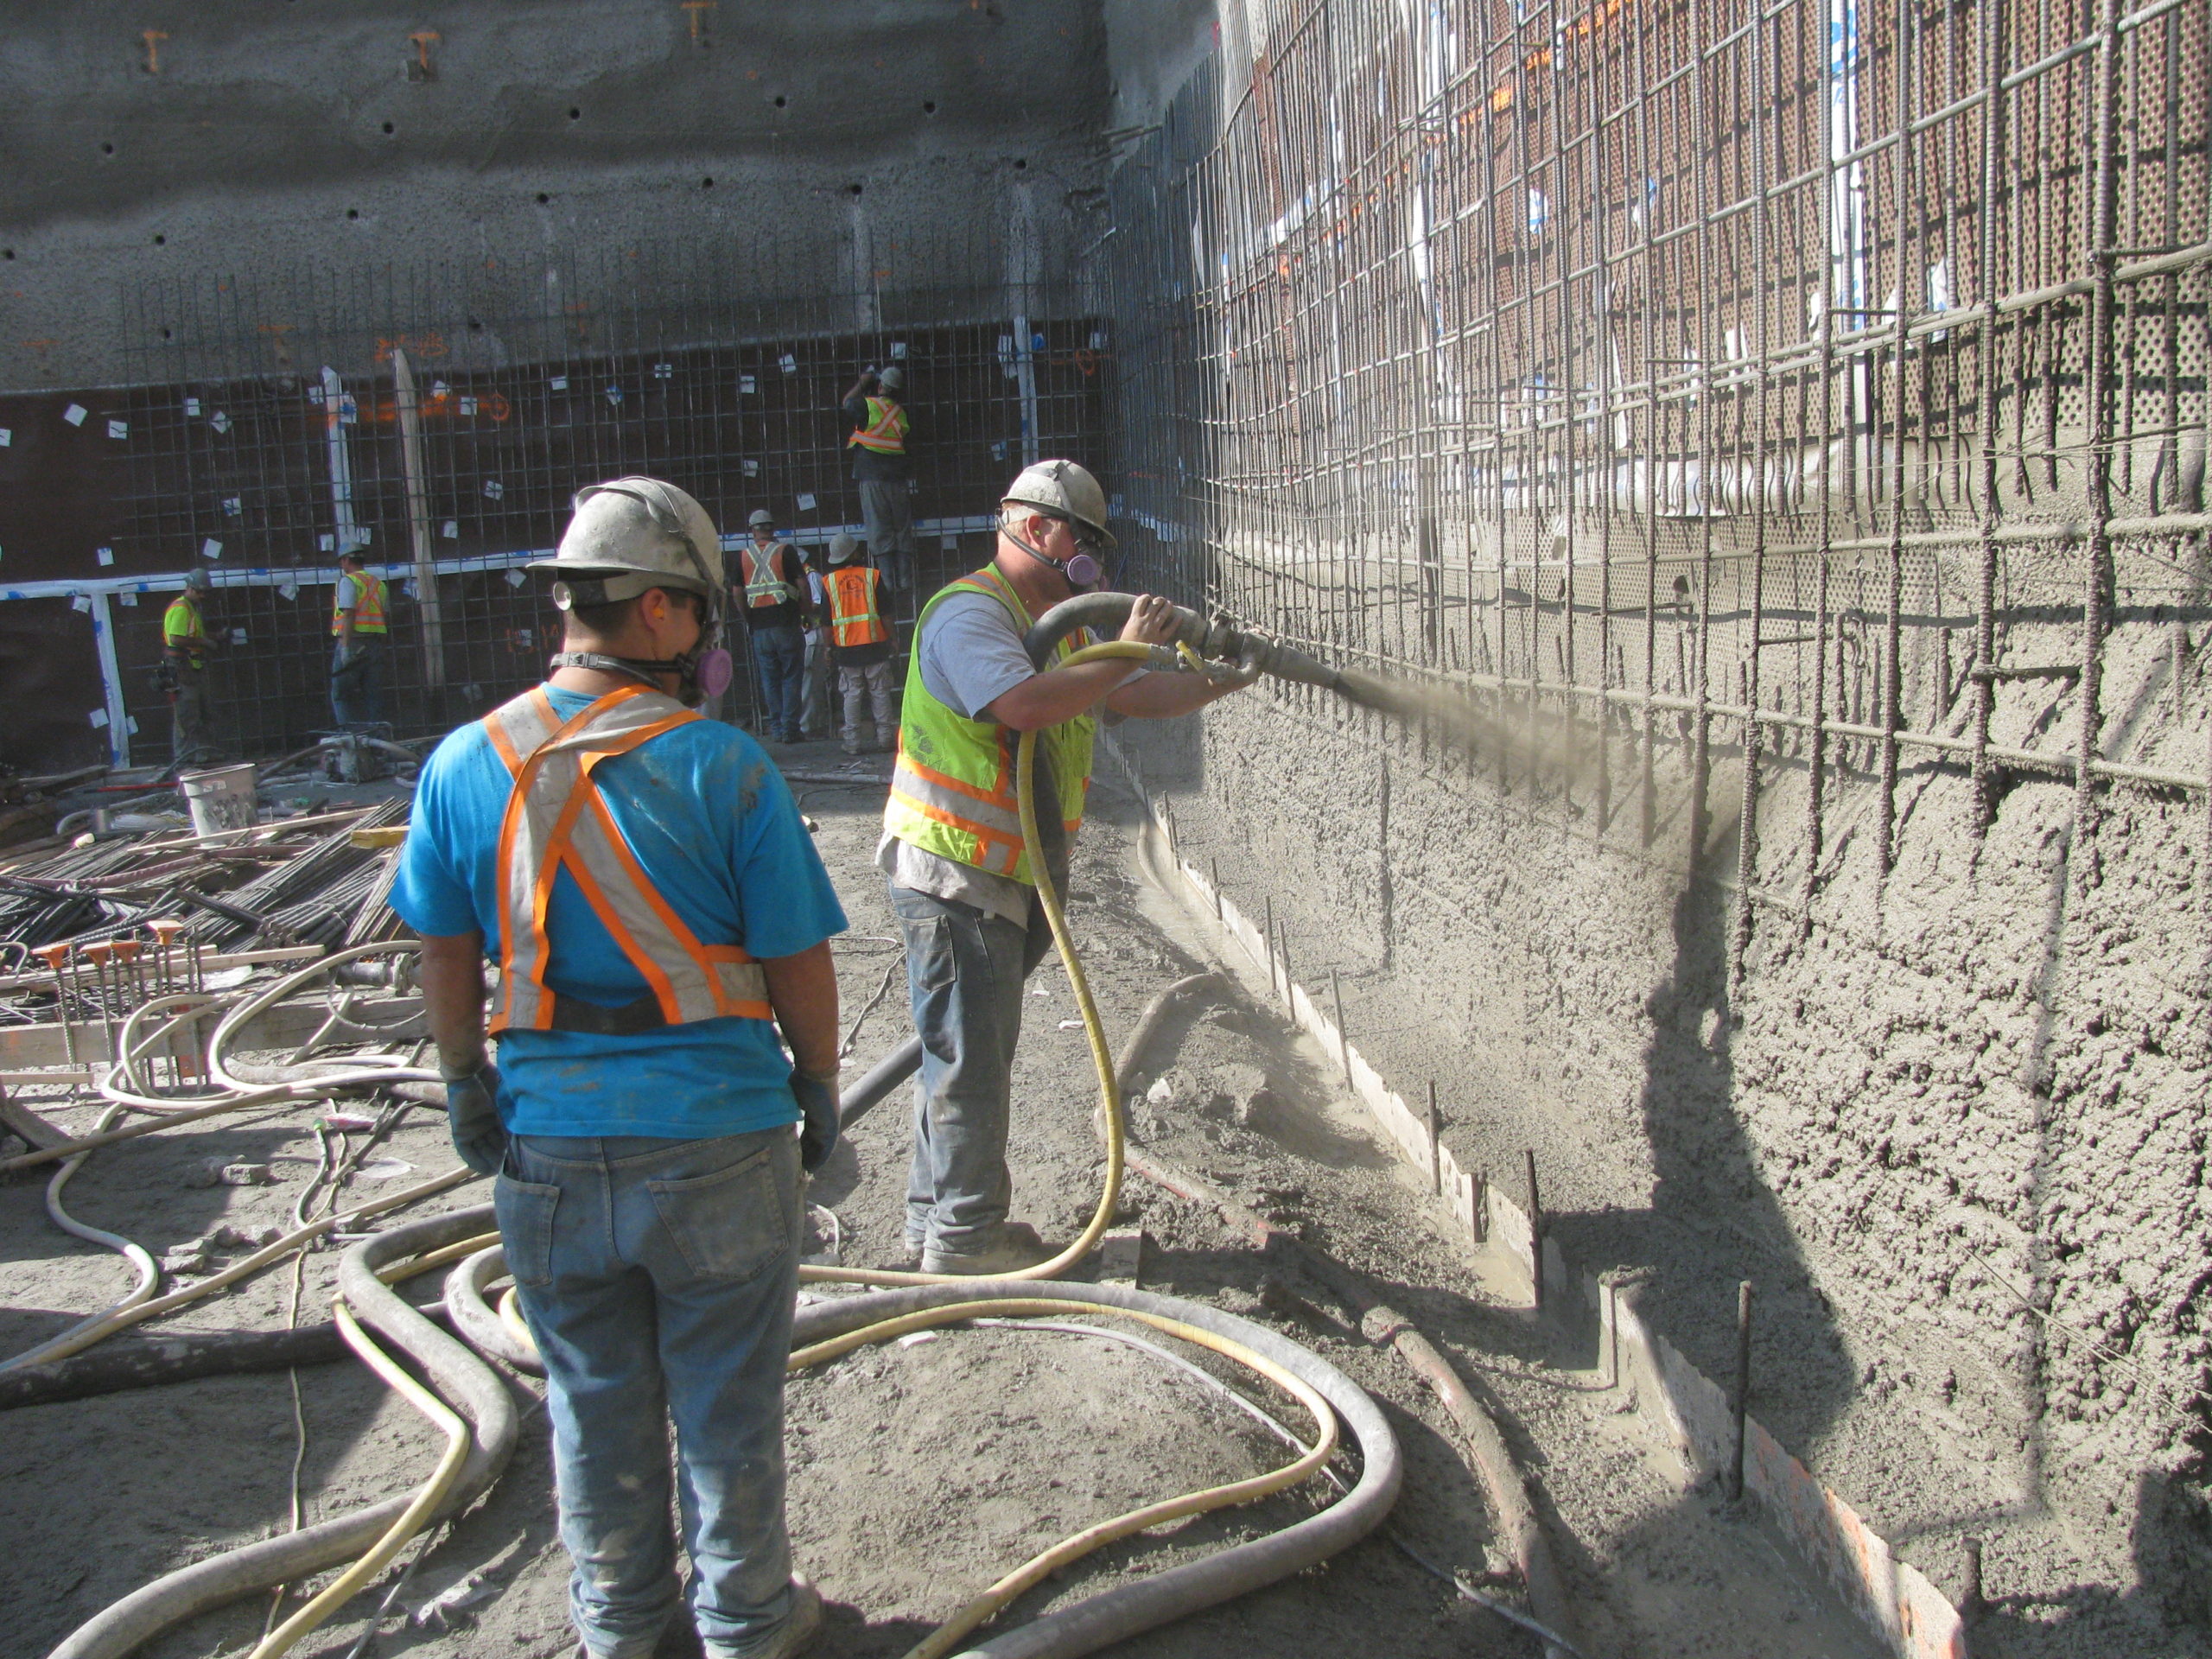 A construction worker looks at a coworker spraying Hard-Cem shotcrete against a barrier.